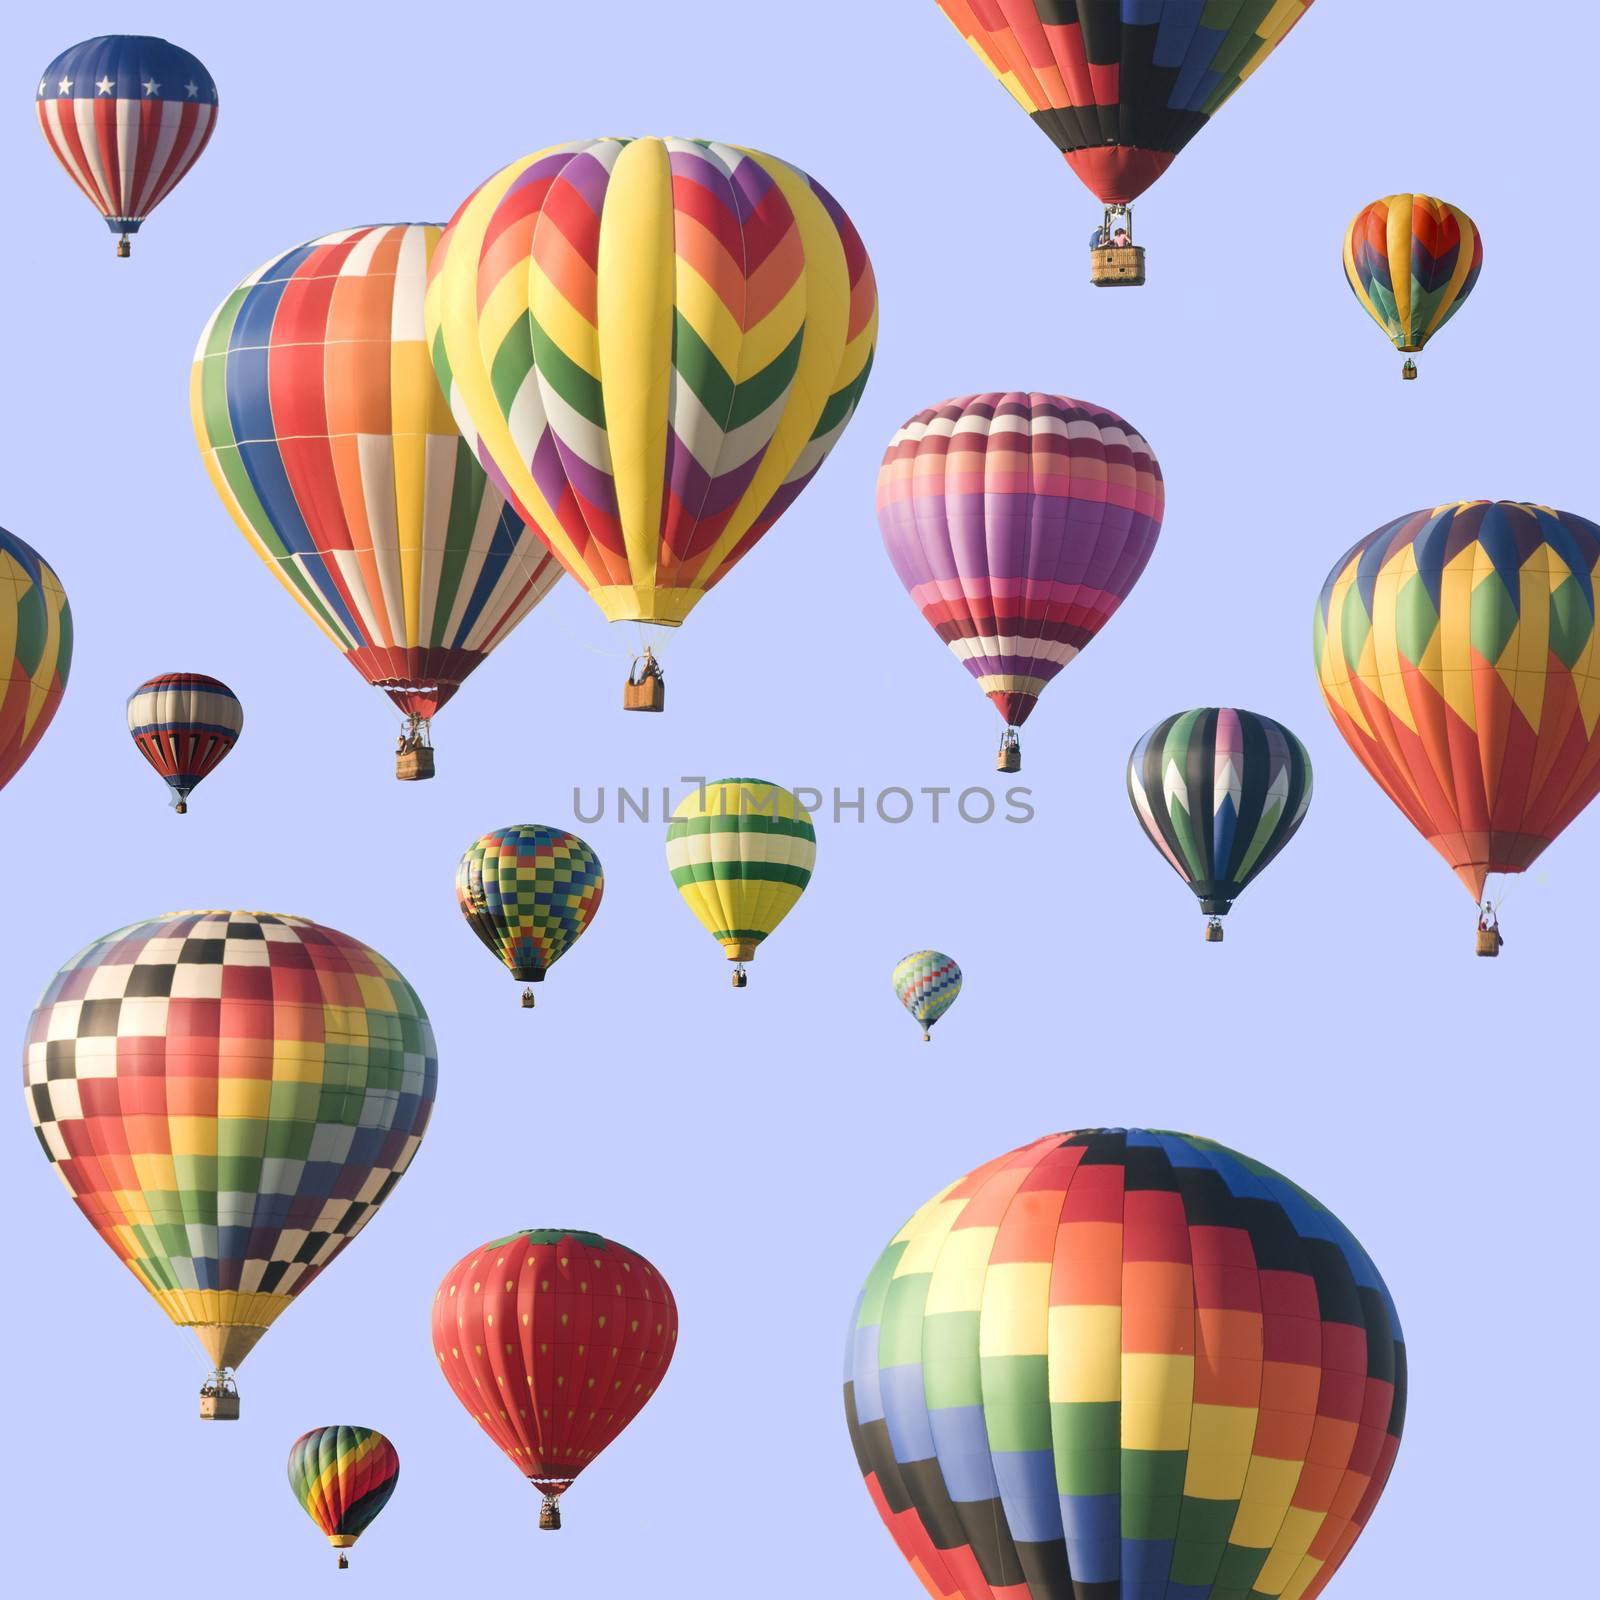 A group of colorful hot-air balloons floating across a blue sky by Balefire9